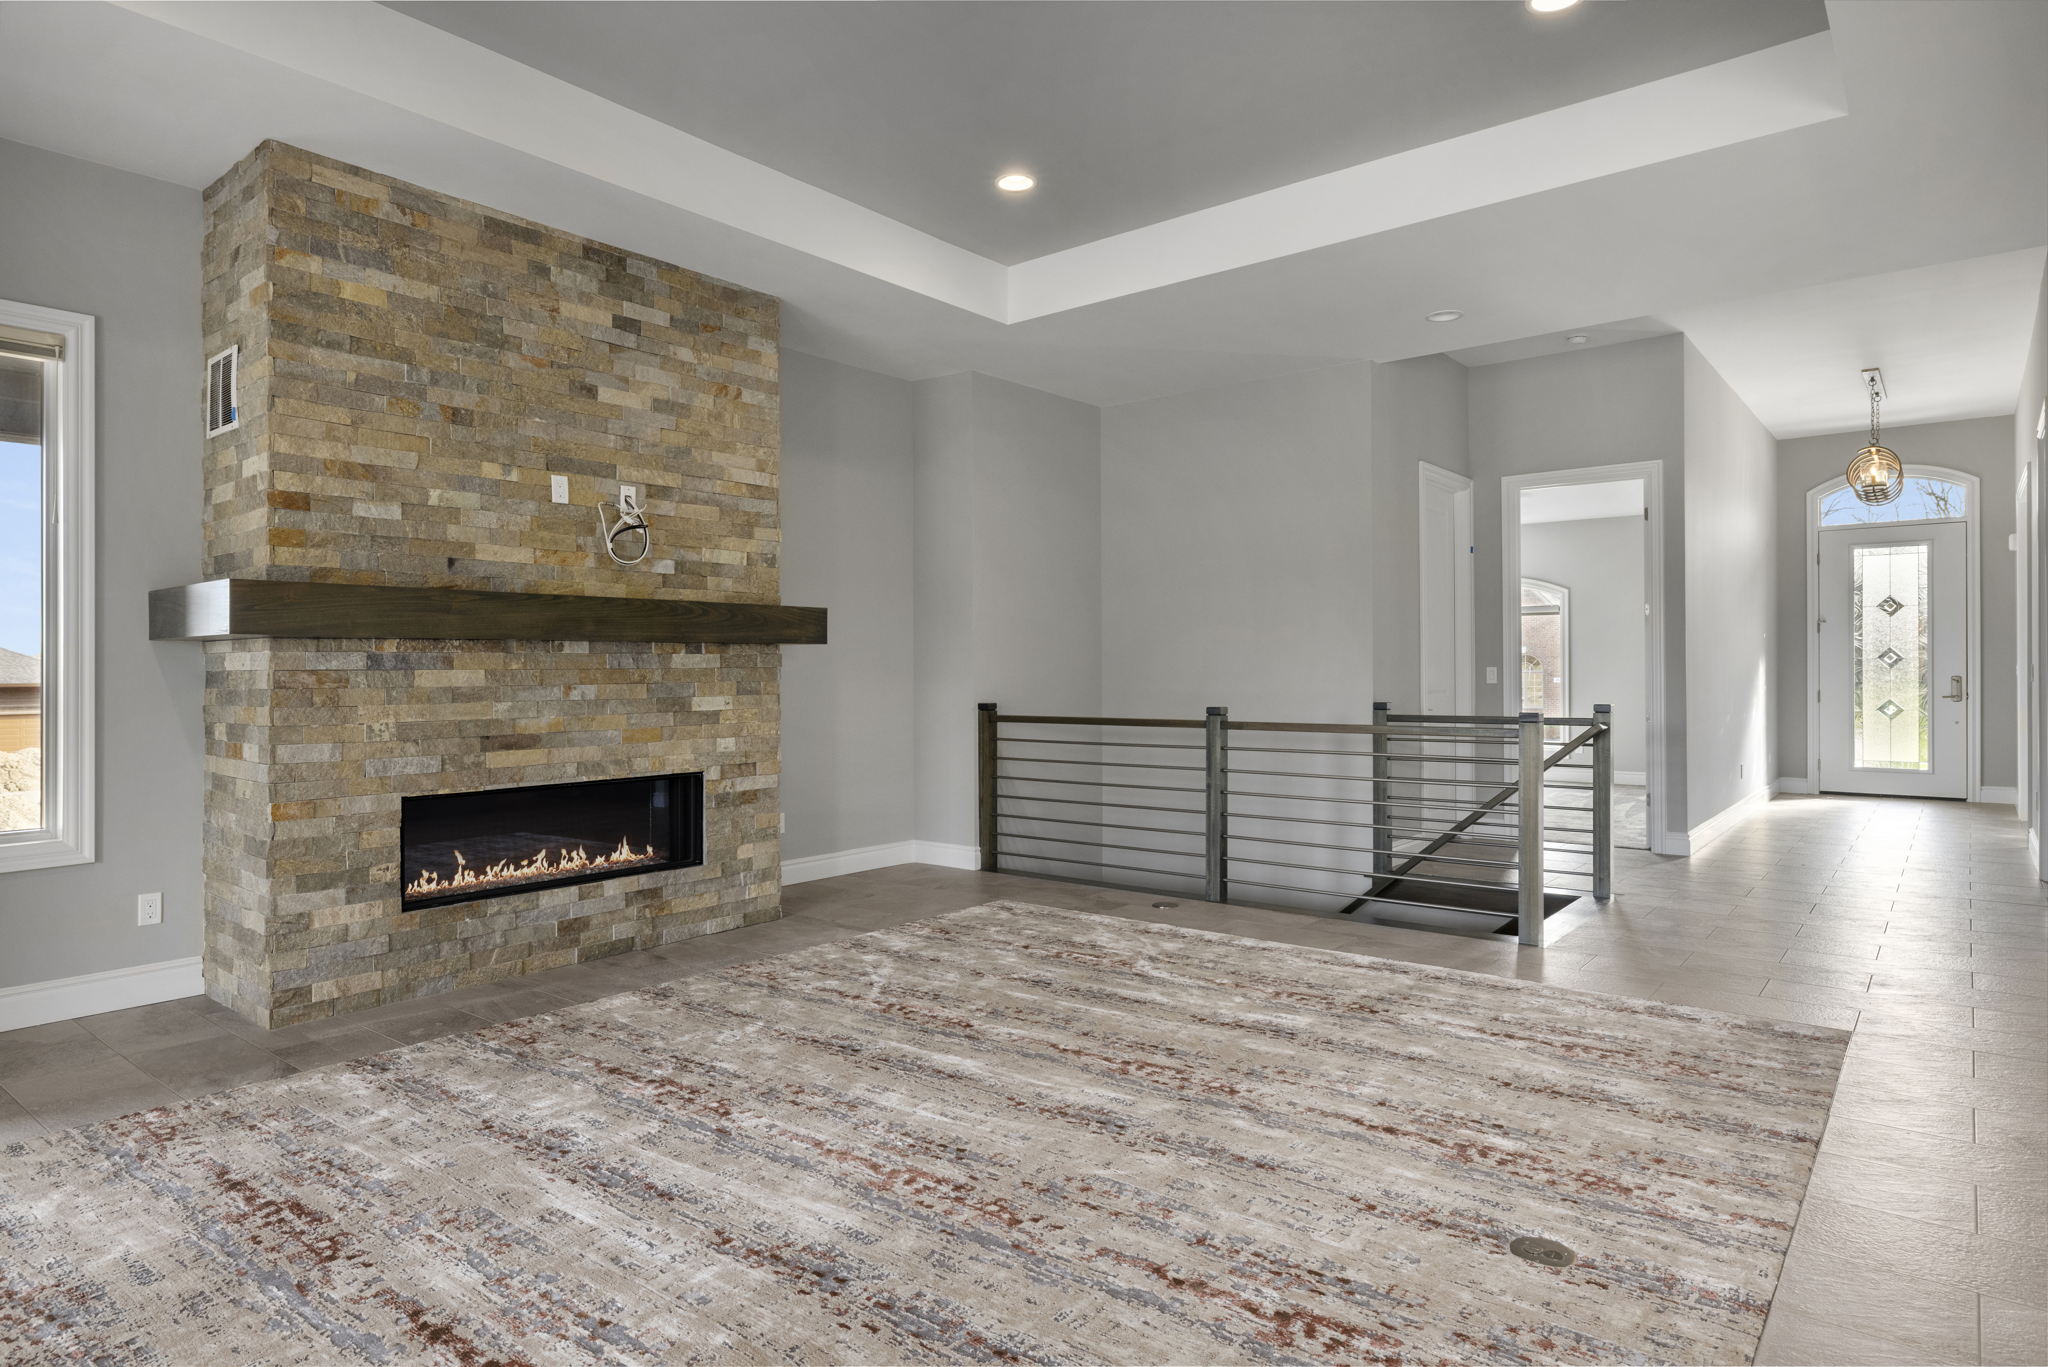 Woodline Building Company Project: Brick Ranch Interior Open Concept Fireplace